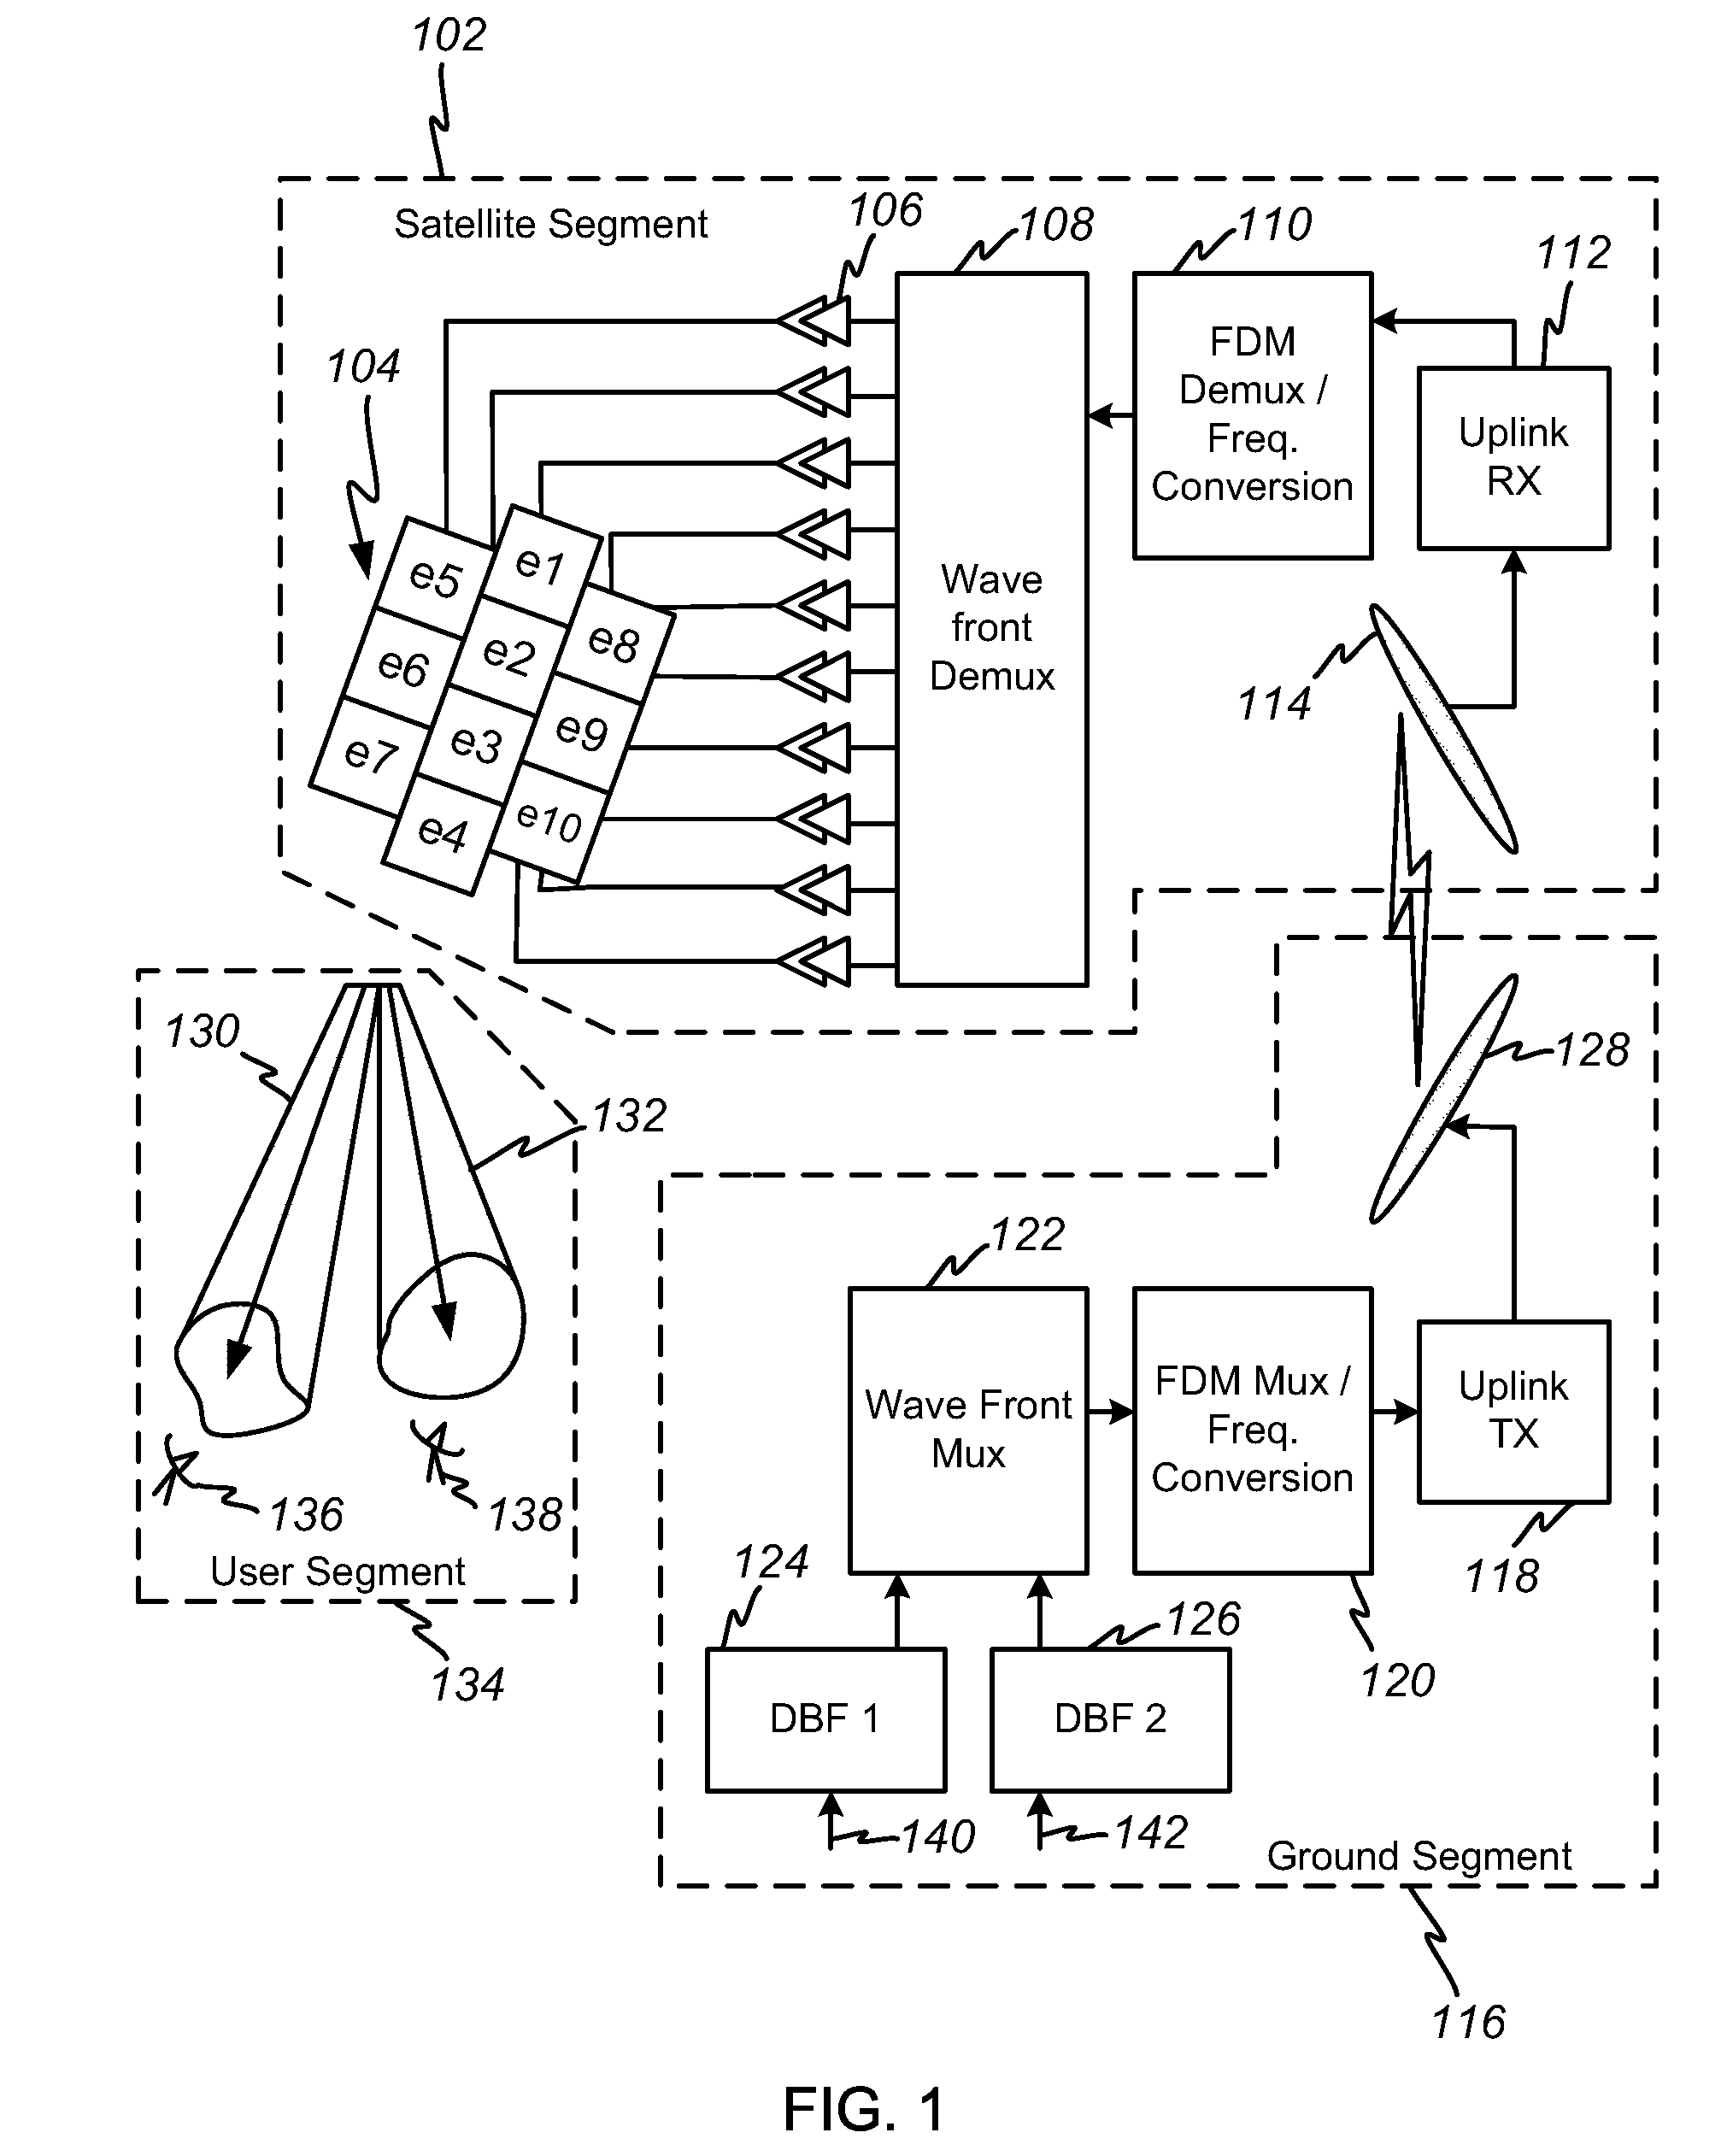 Apparatus and method for remote beam forming for satellite broadcasting systems